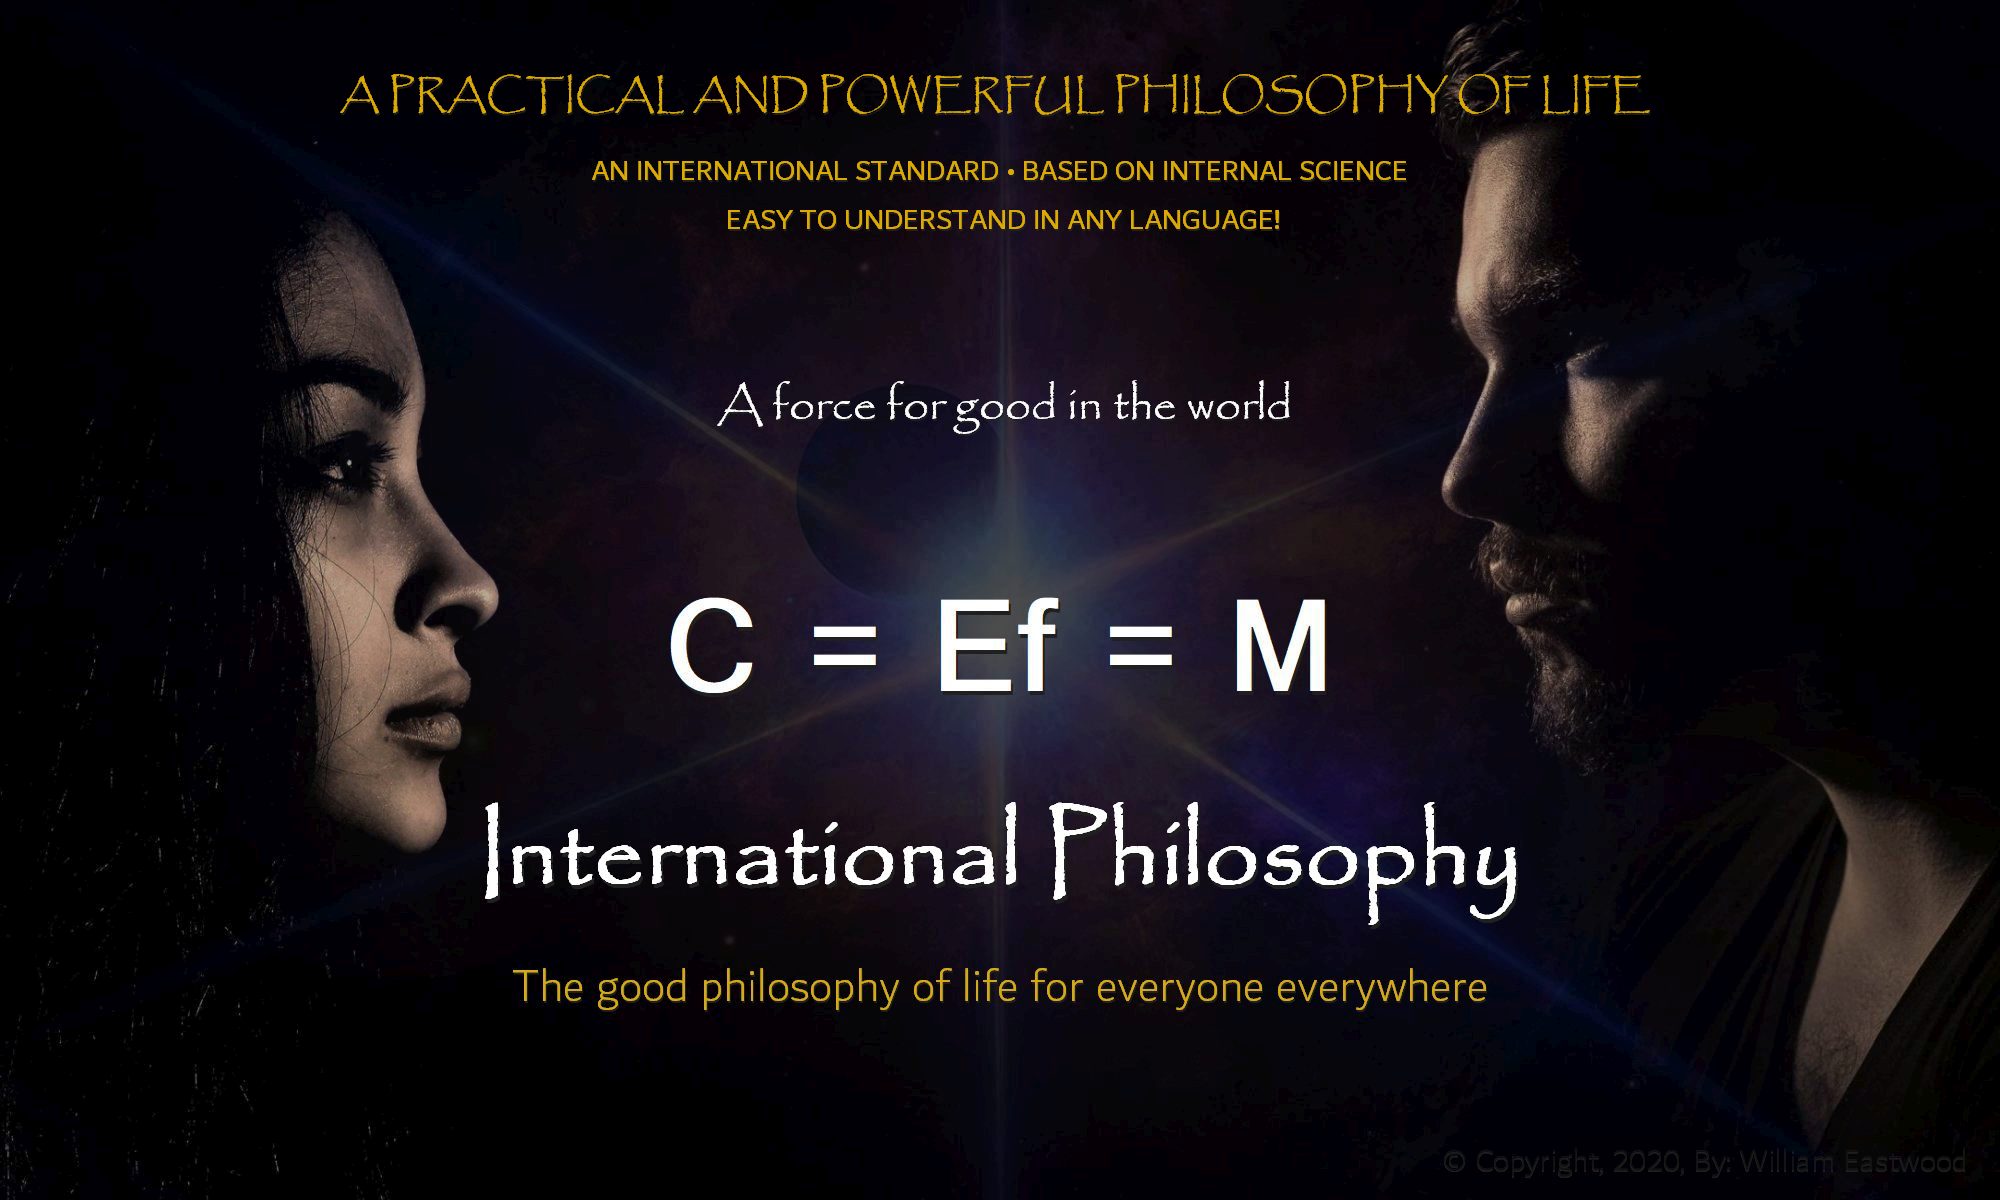 Thought create matter presents International Philosophy by William Eastwood the Inner UN